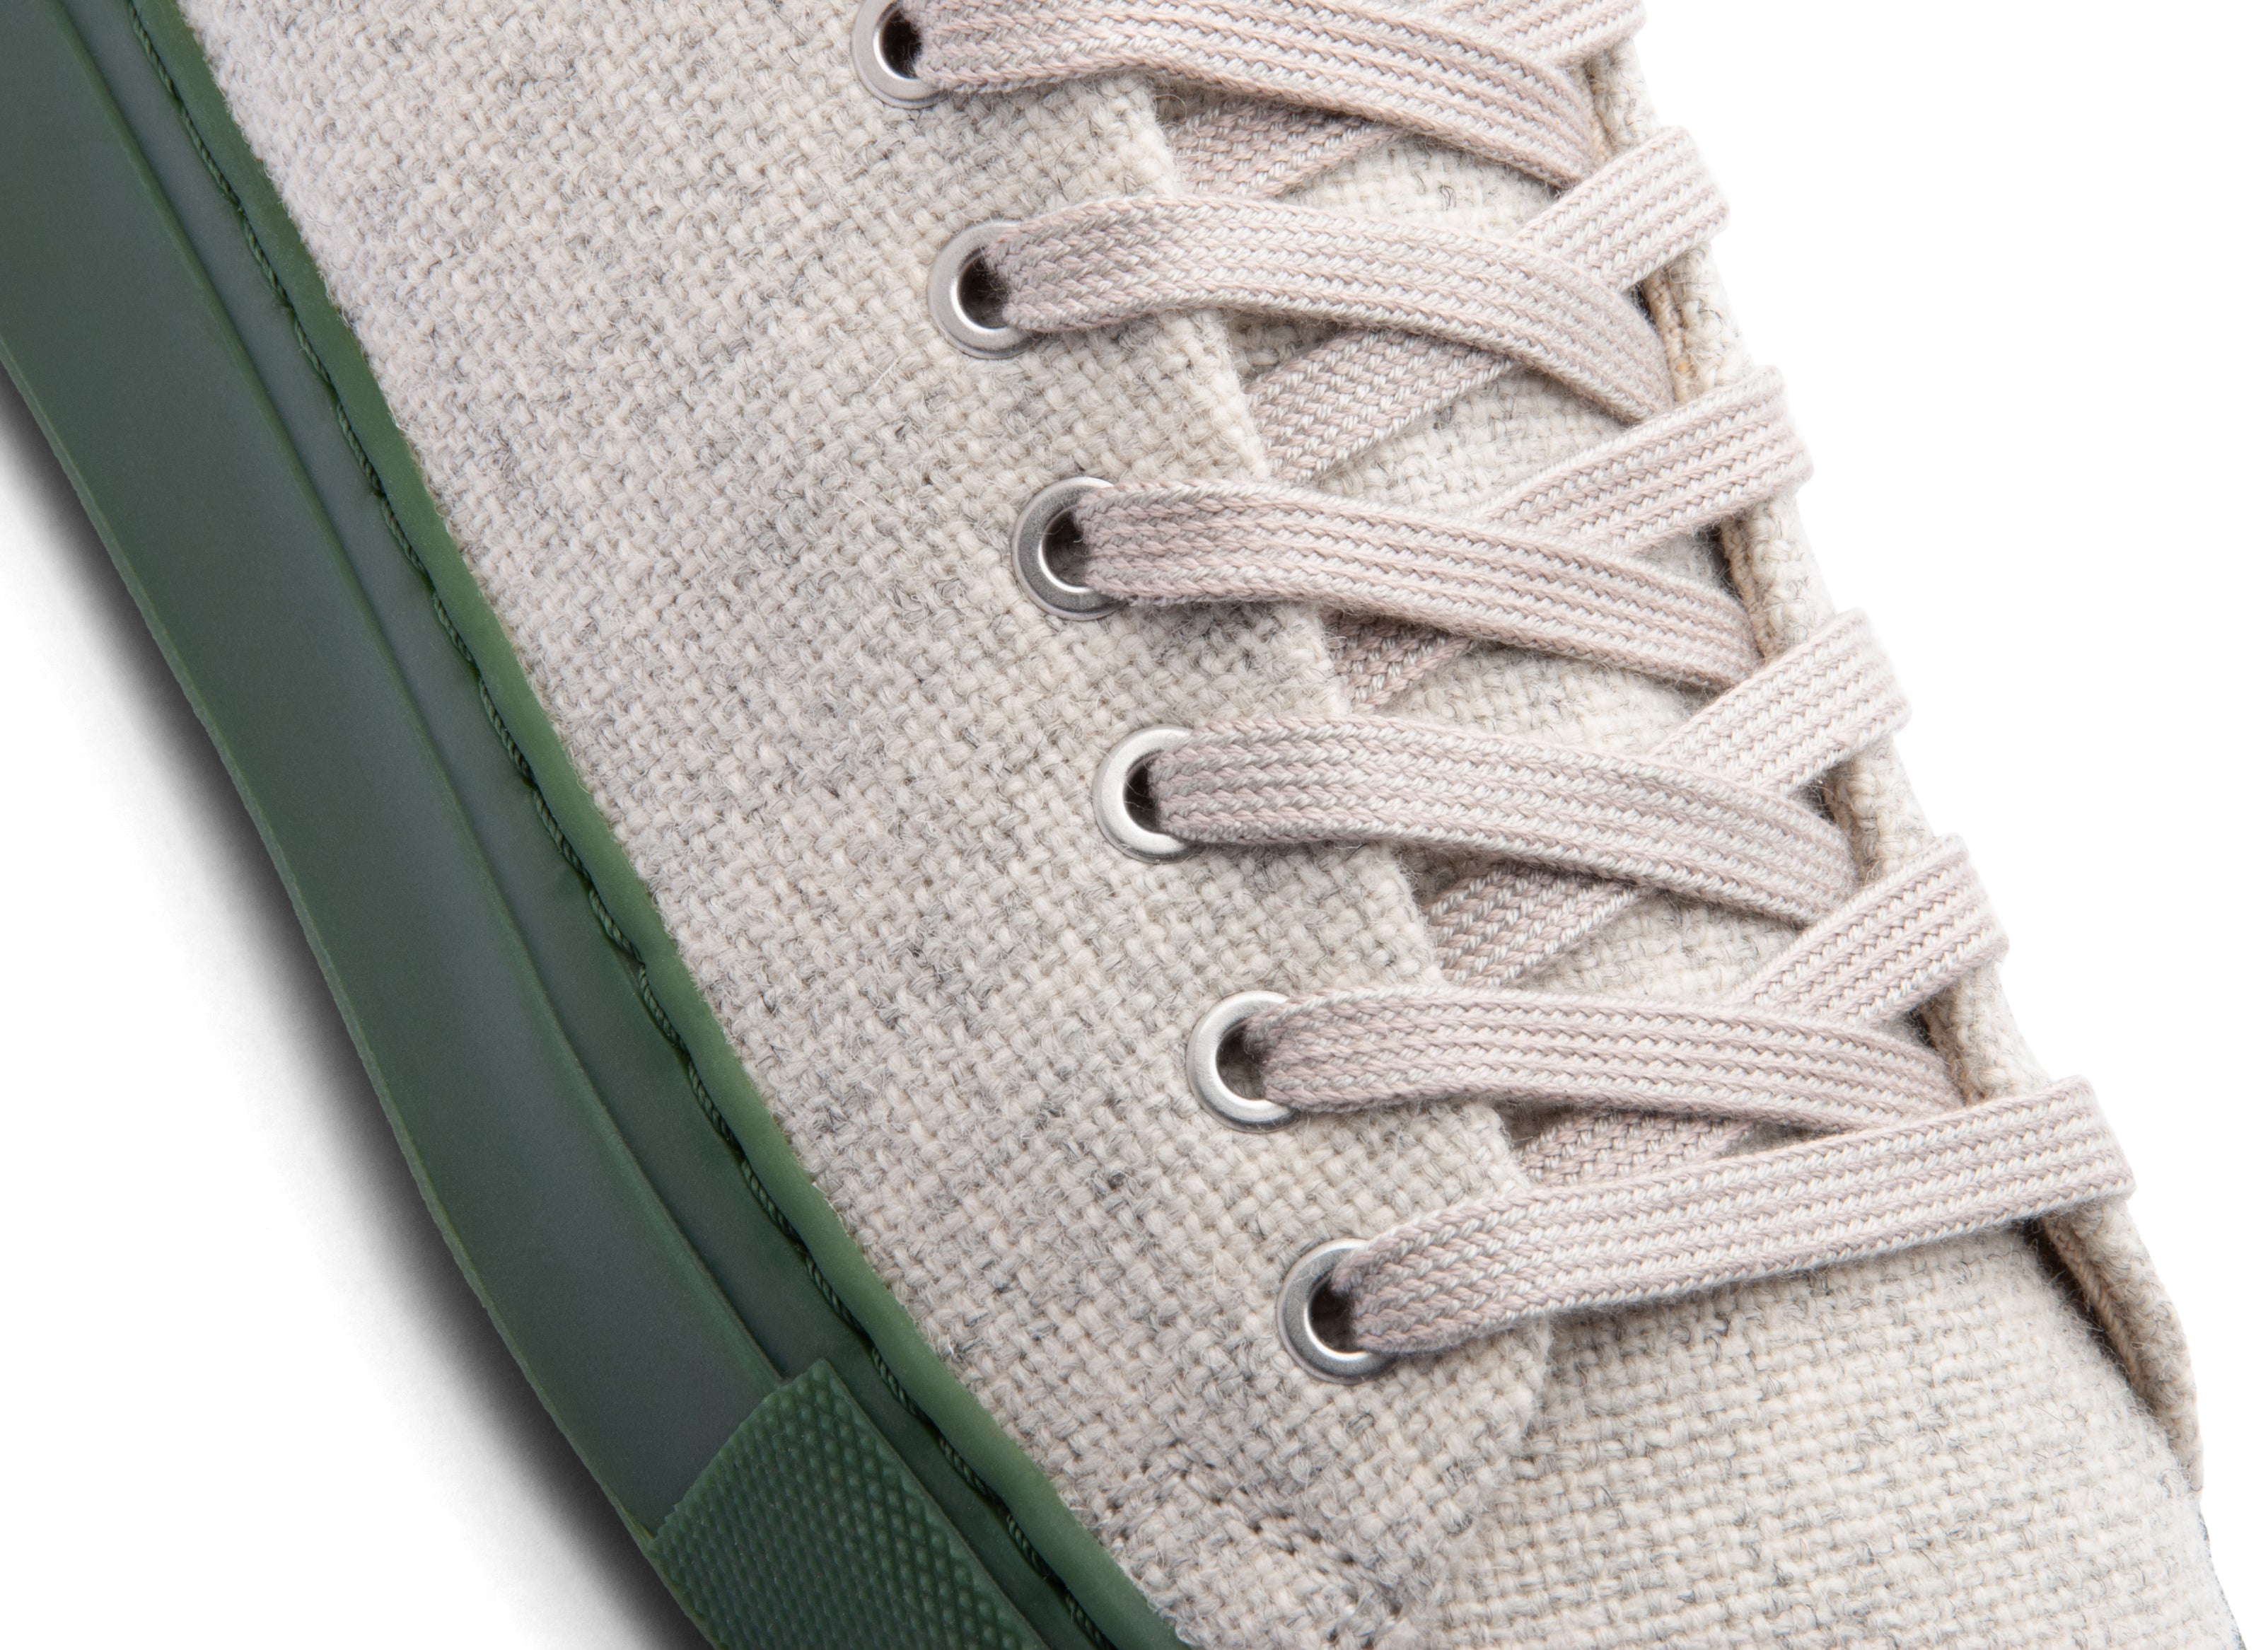 Low-top natural sneakers for winter in the color white. Made from 100% thermoregulating and water-repellent wool with pure hemp lining, wool-covered cork insoles and rubber outsoles with deeper grooves for improved grip. OEKO-TEX certified sneakers manufactured in the EU.